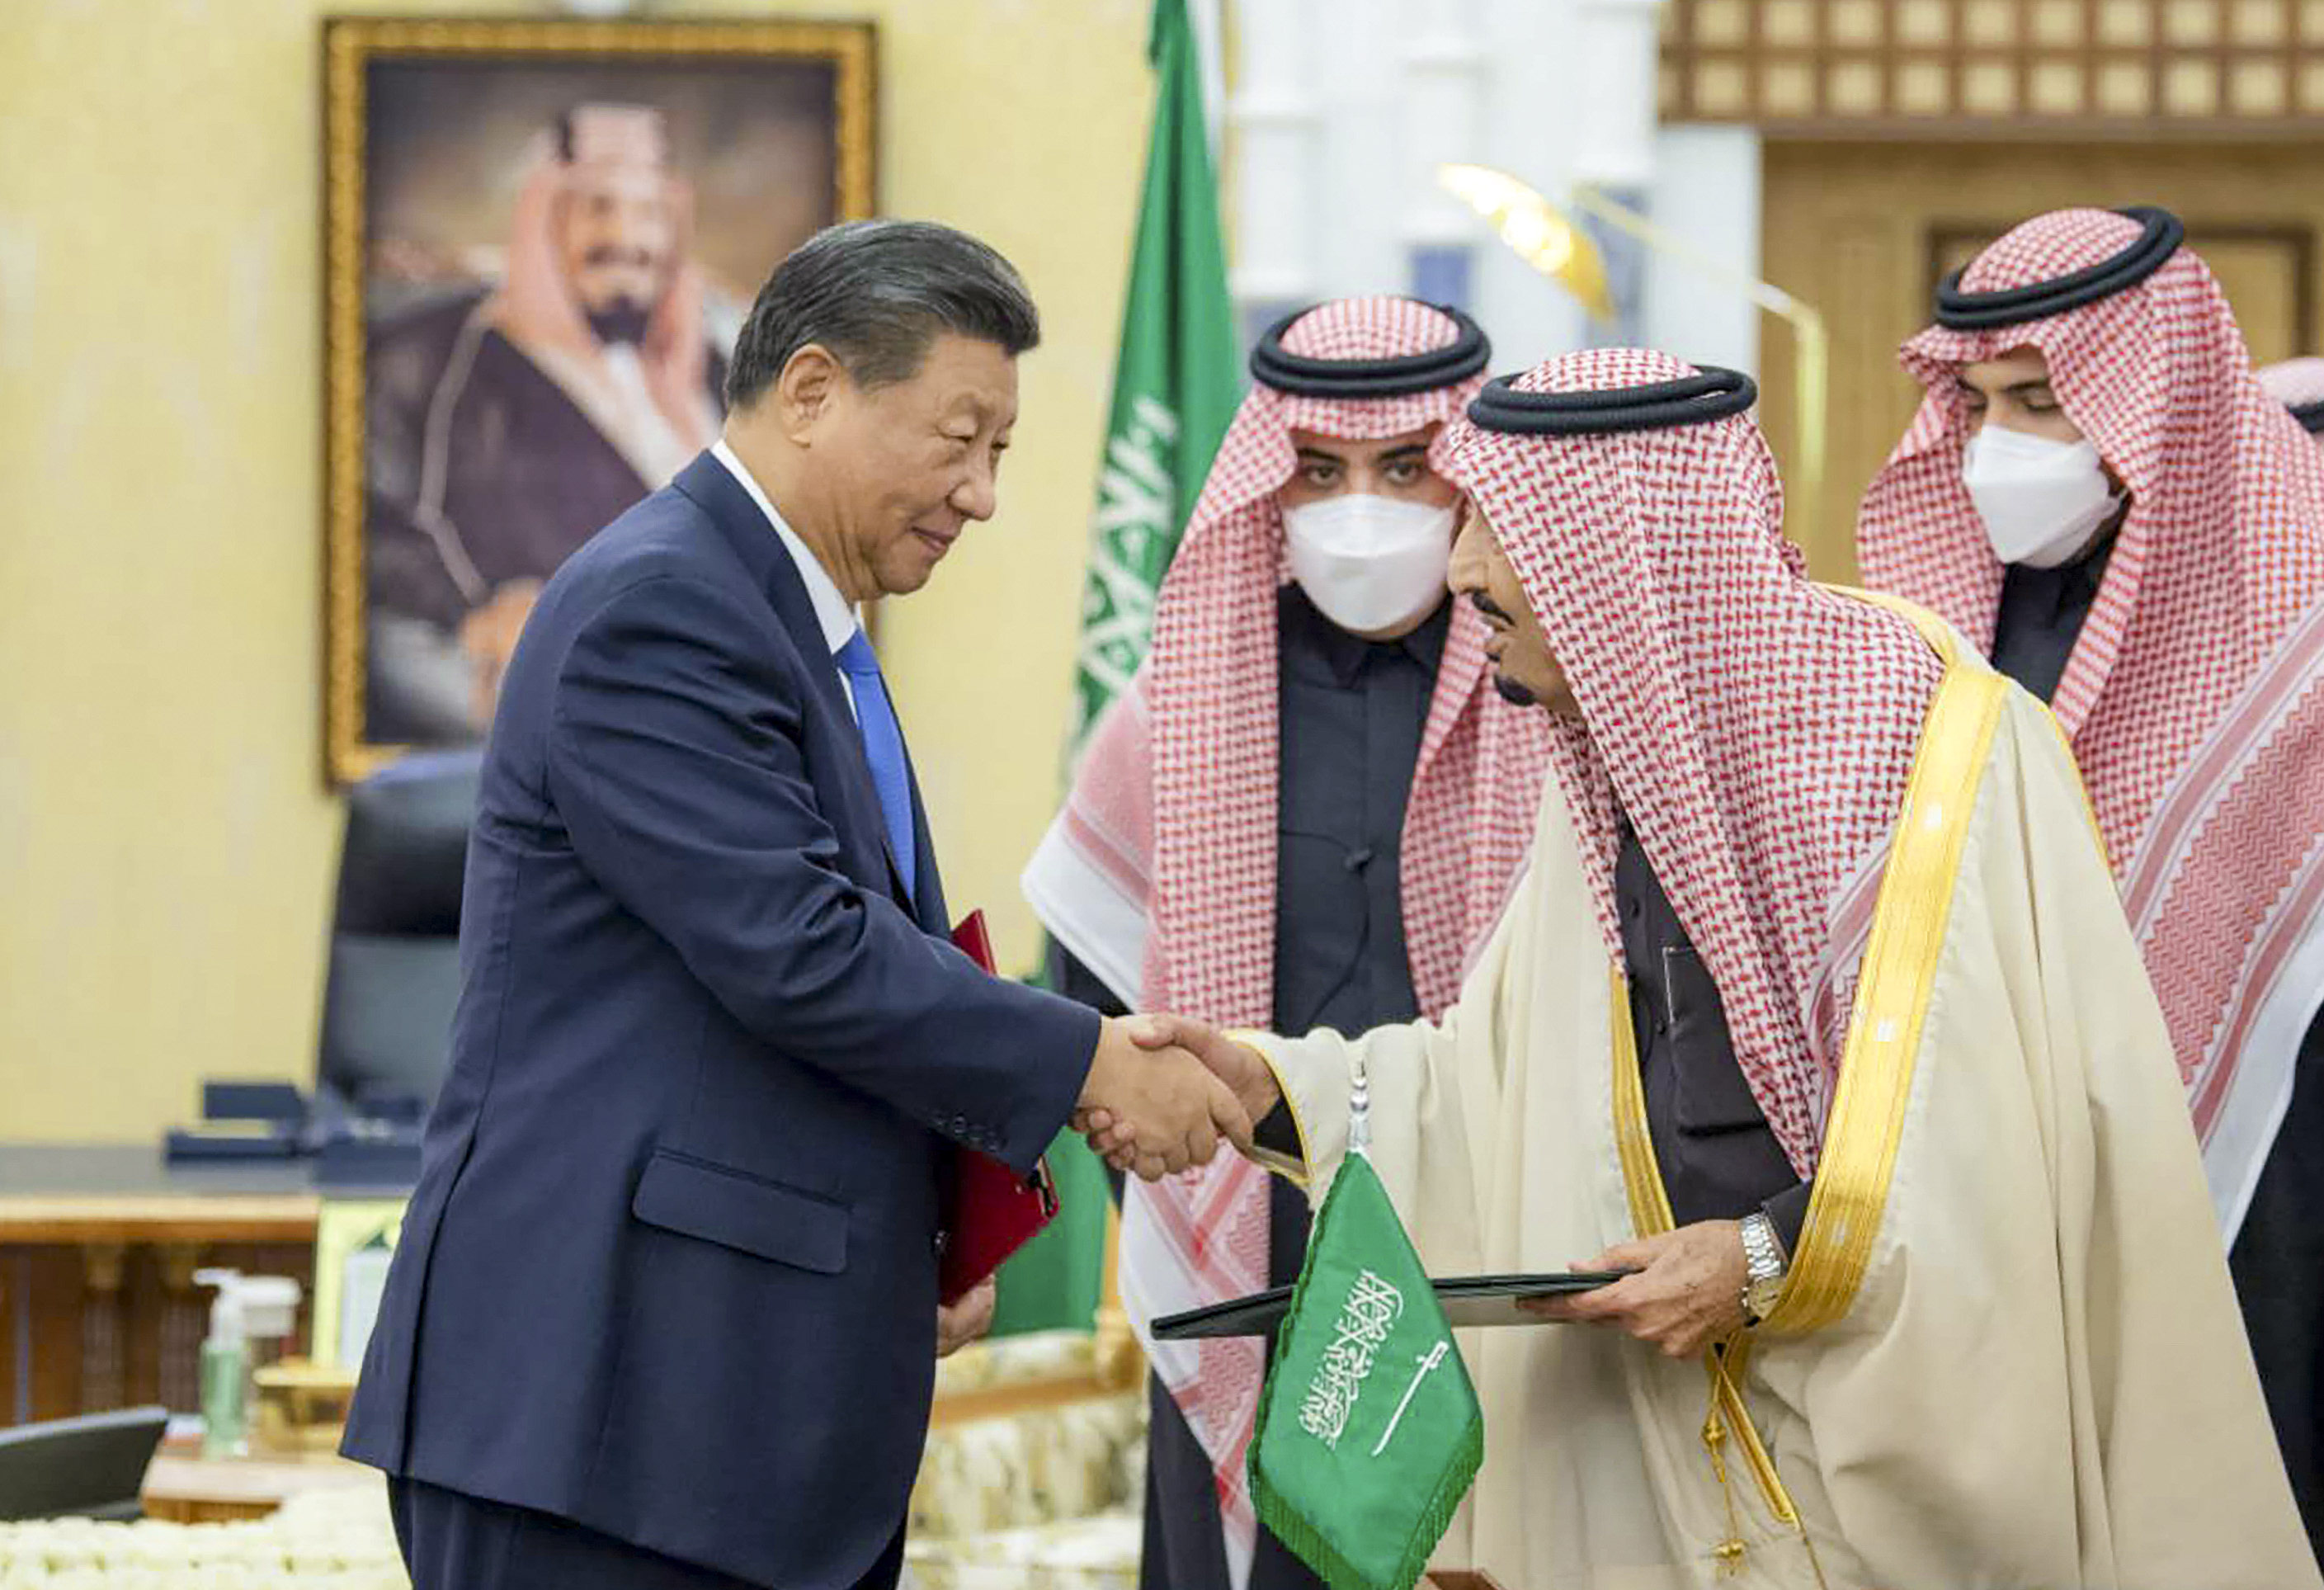 China and Saudi Arabia pledge to widen ties to 'all fields' and work together on Iran nuclear programme | South China Morning Post